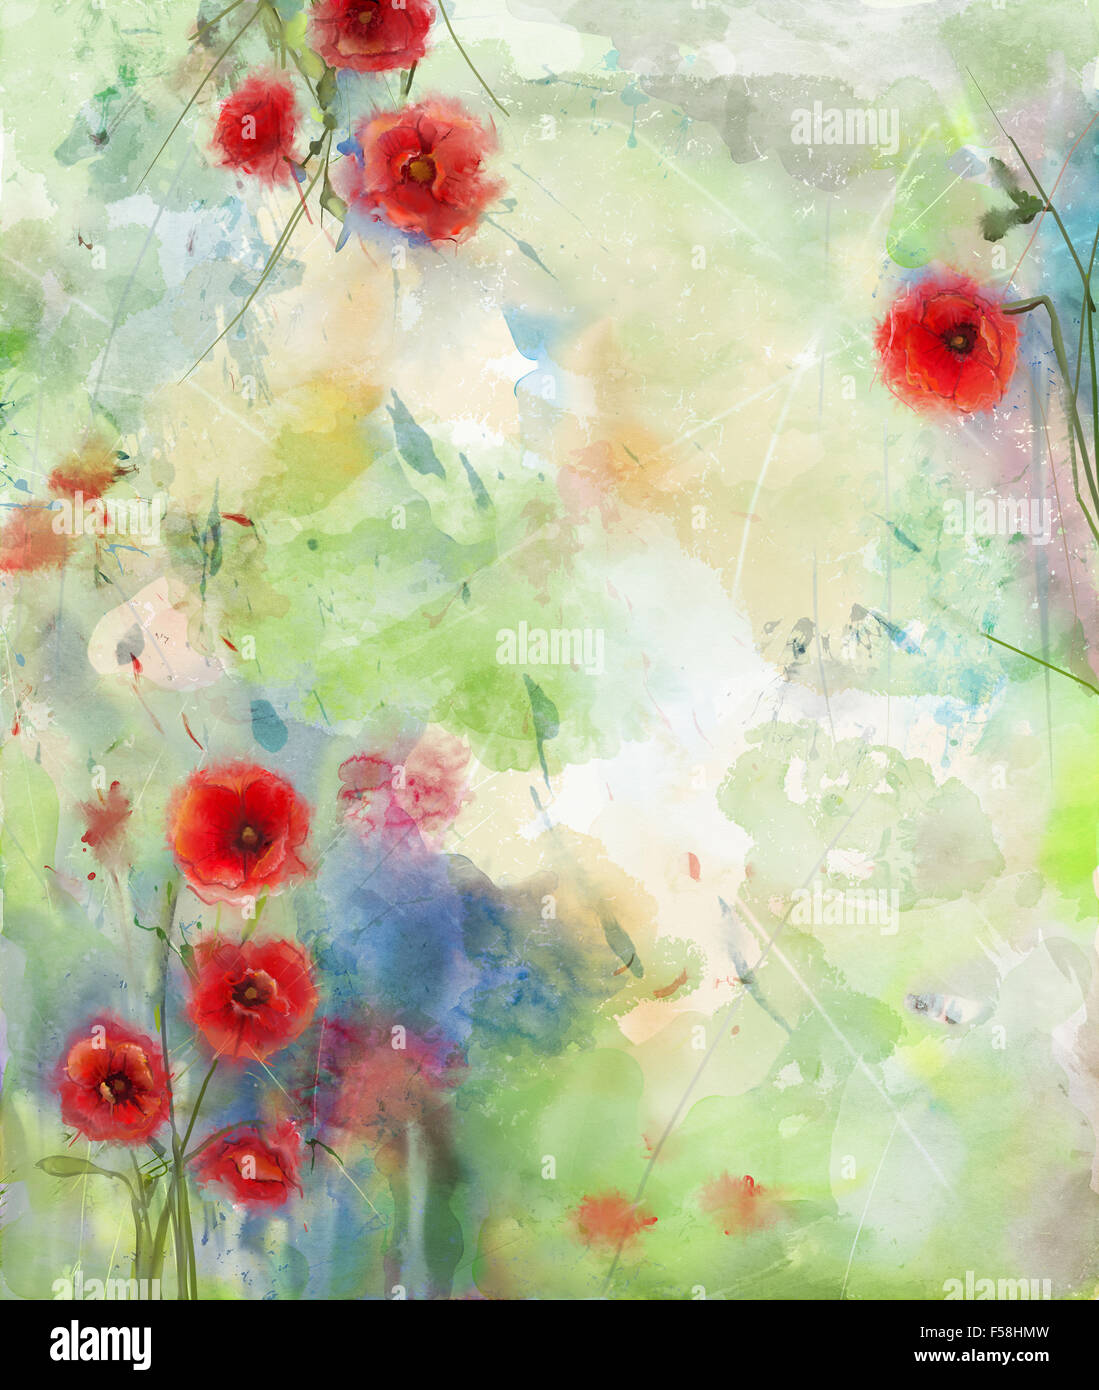 Red poppy flower with scenic watercolor background Stock Photo